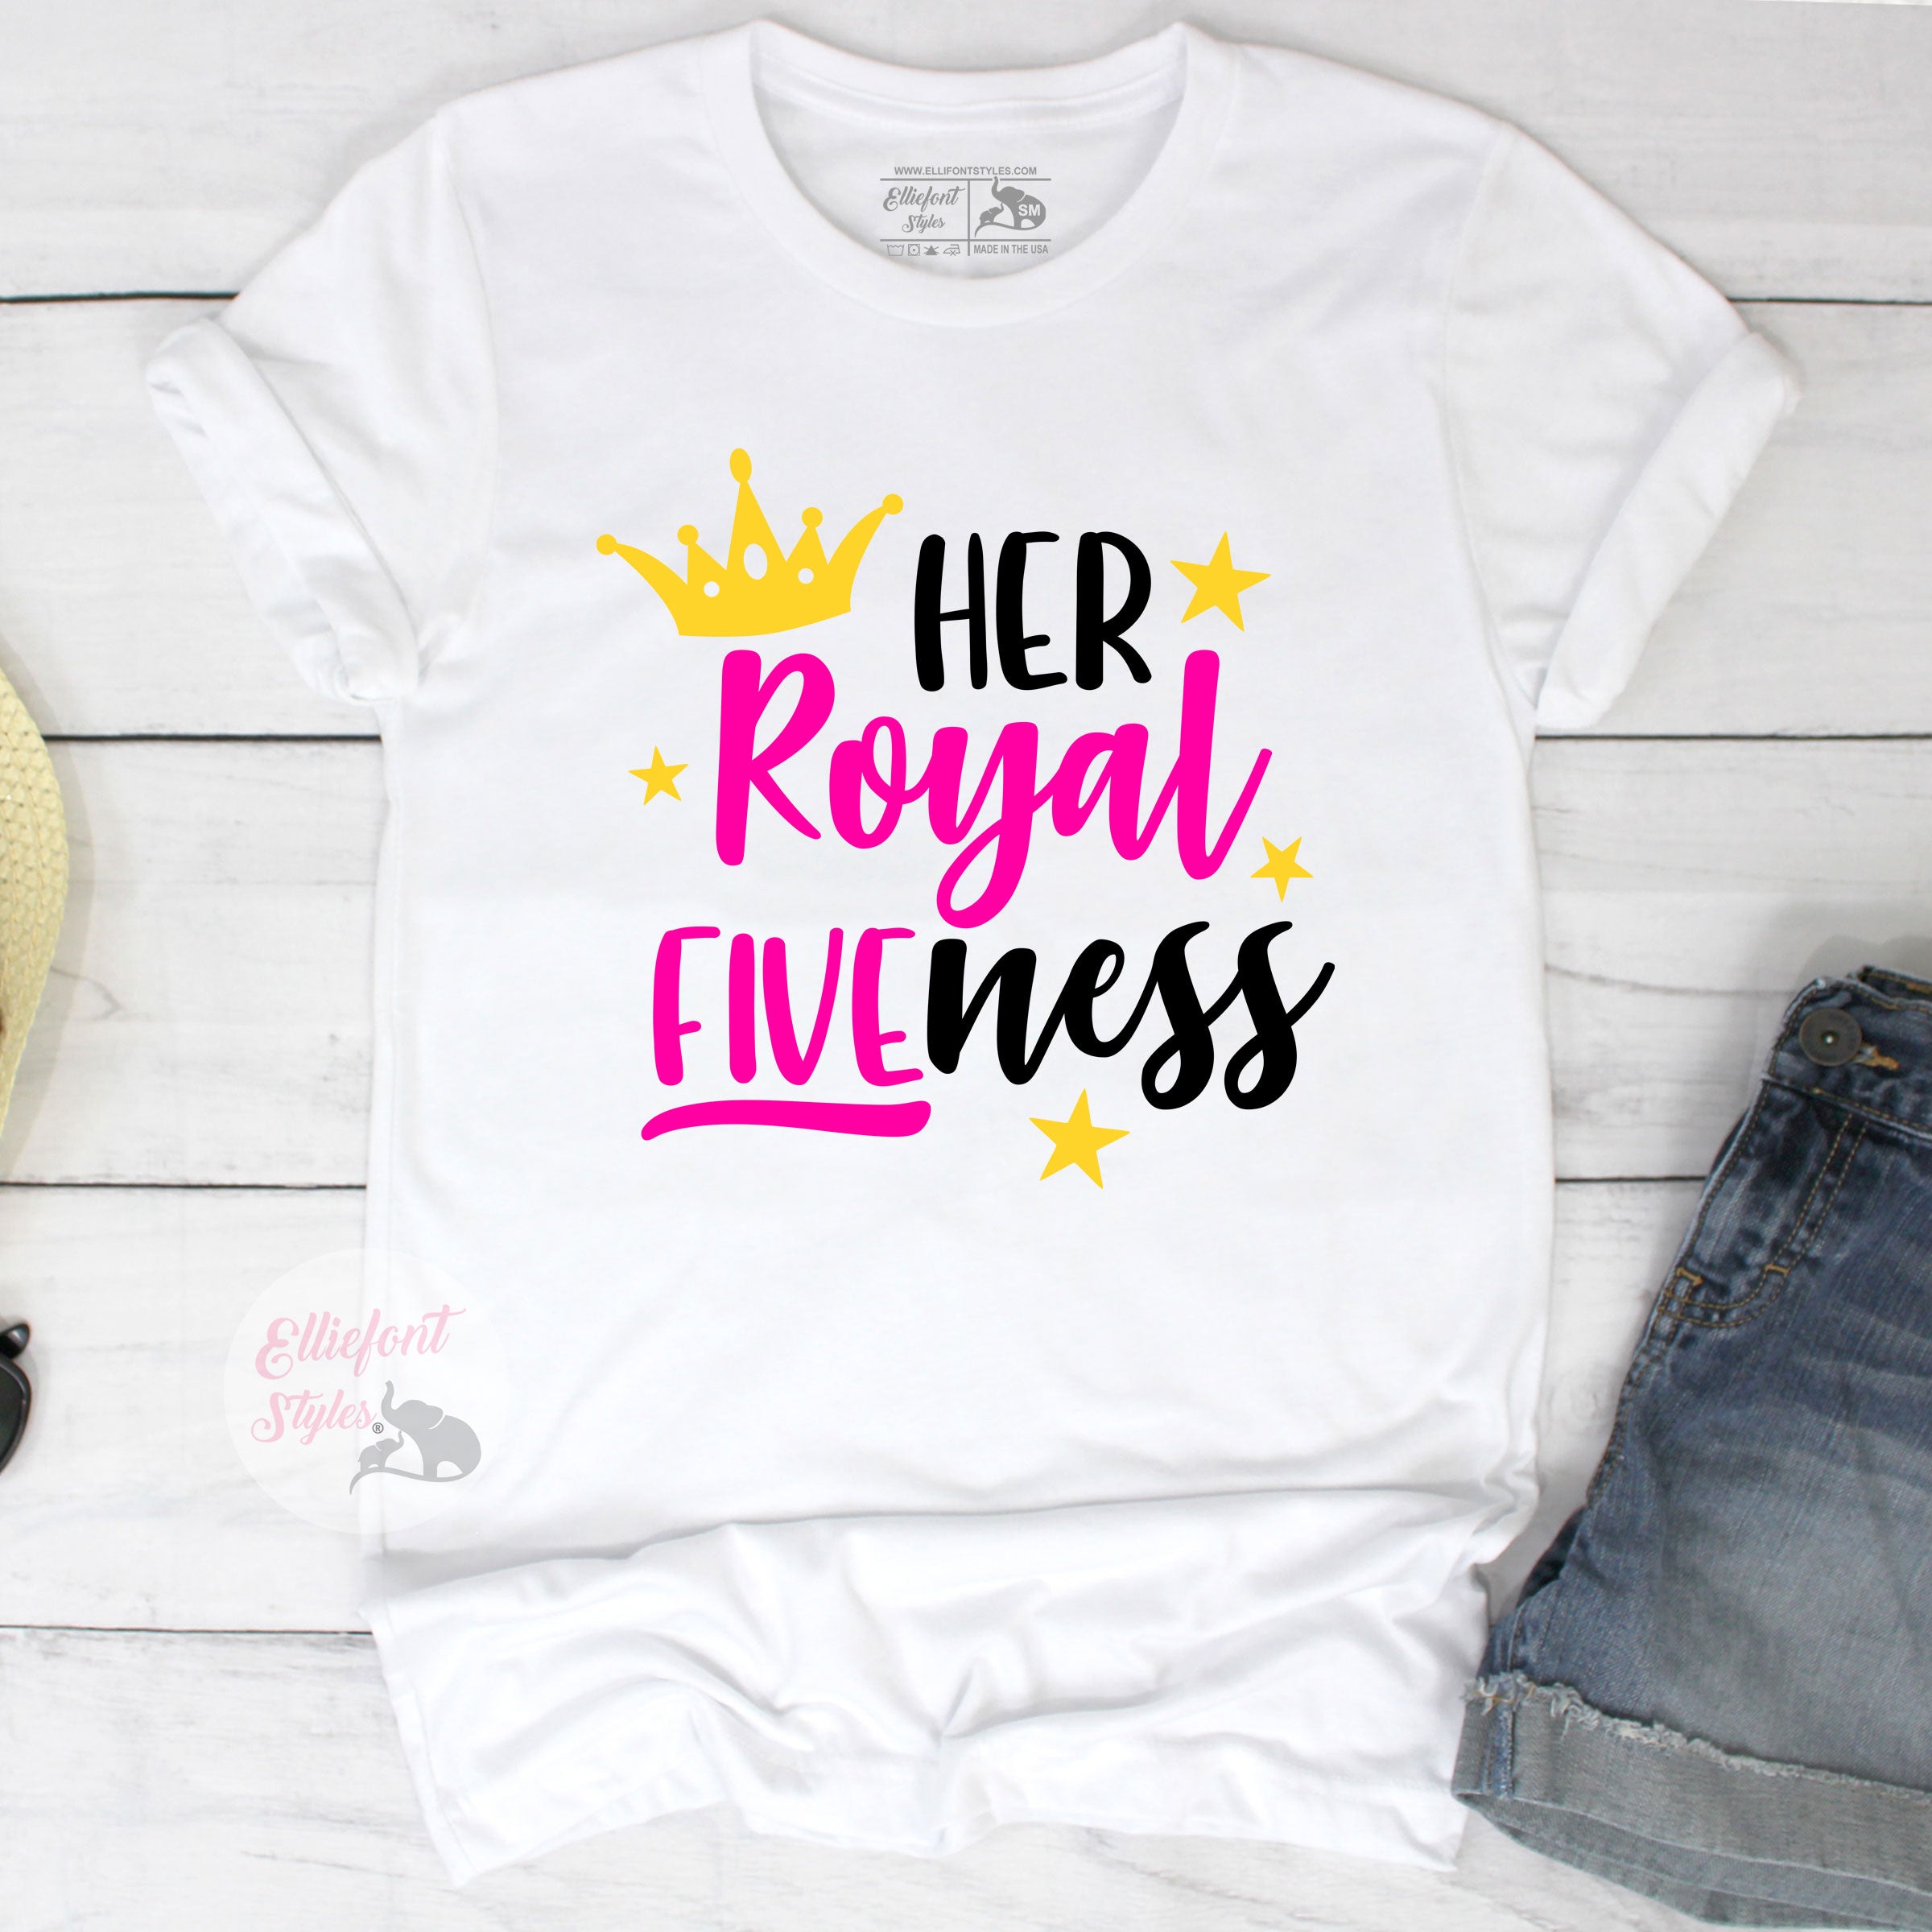 Her Royal Fiveness Birthday Shirt – Elliefont Styles